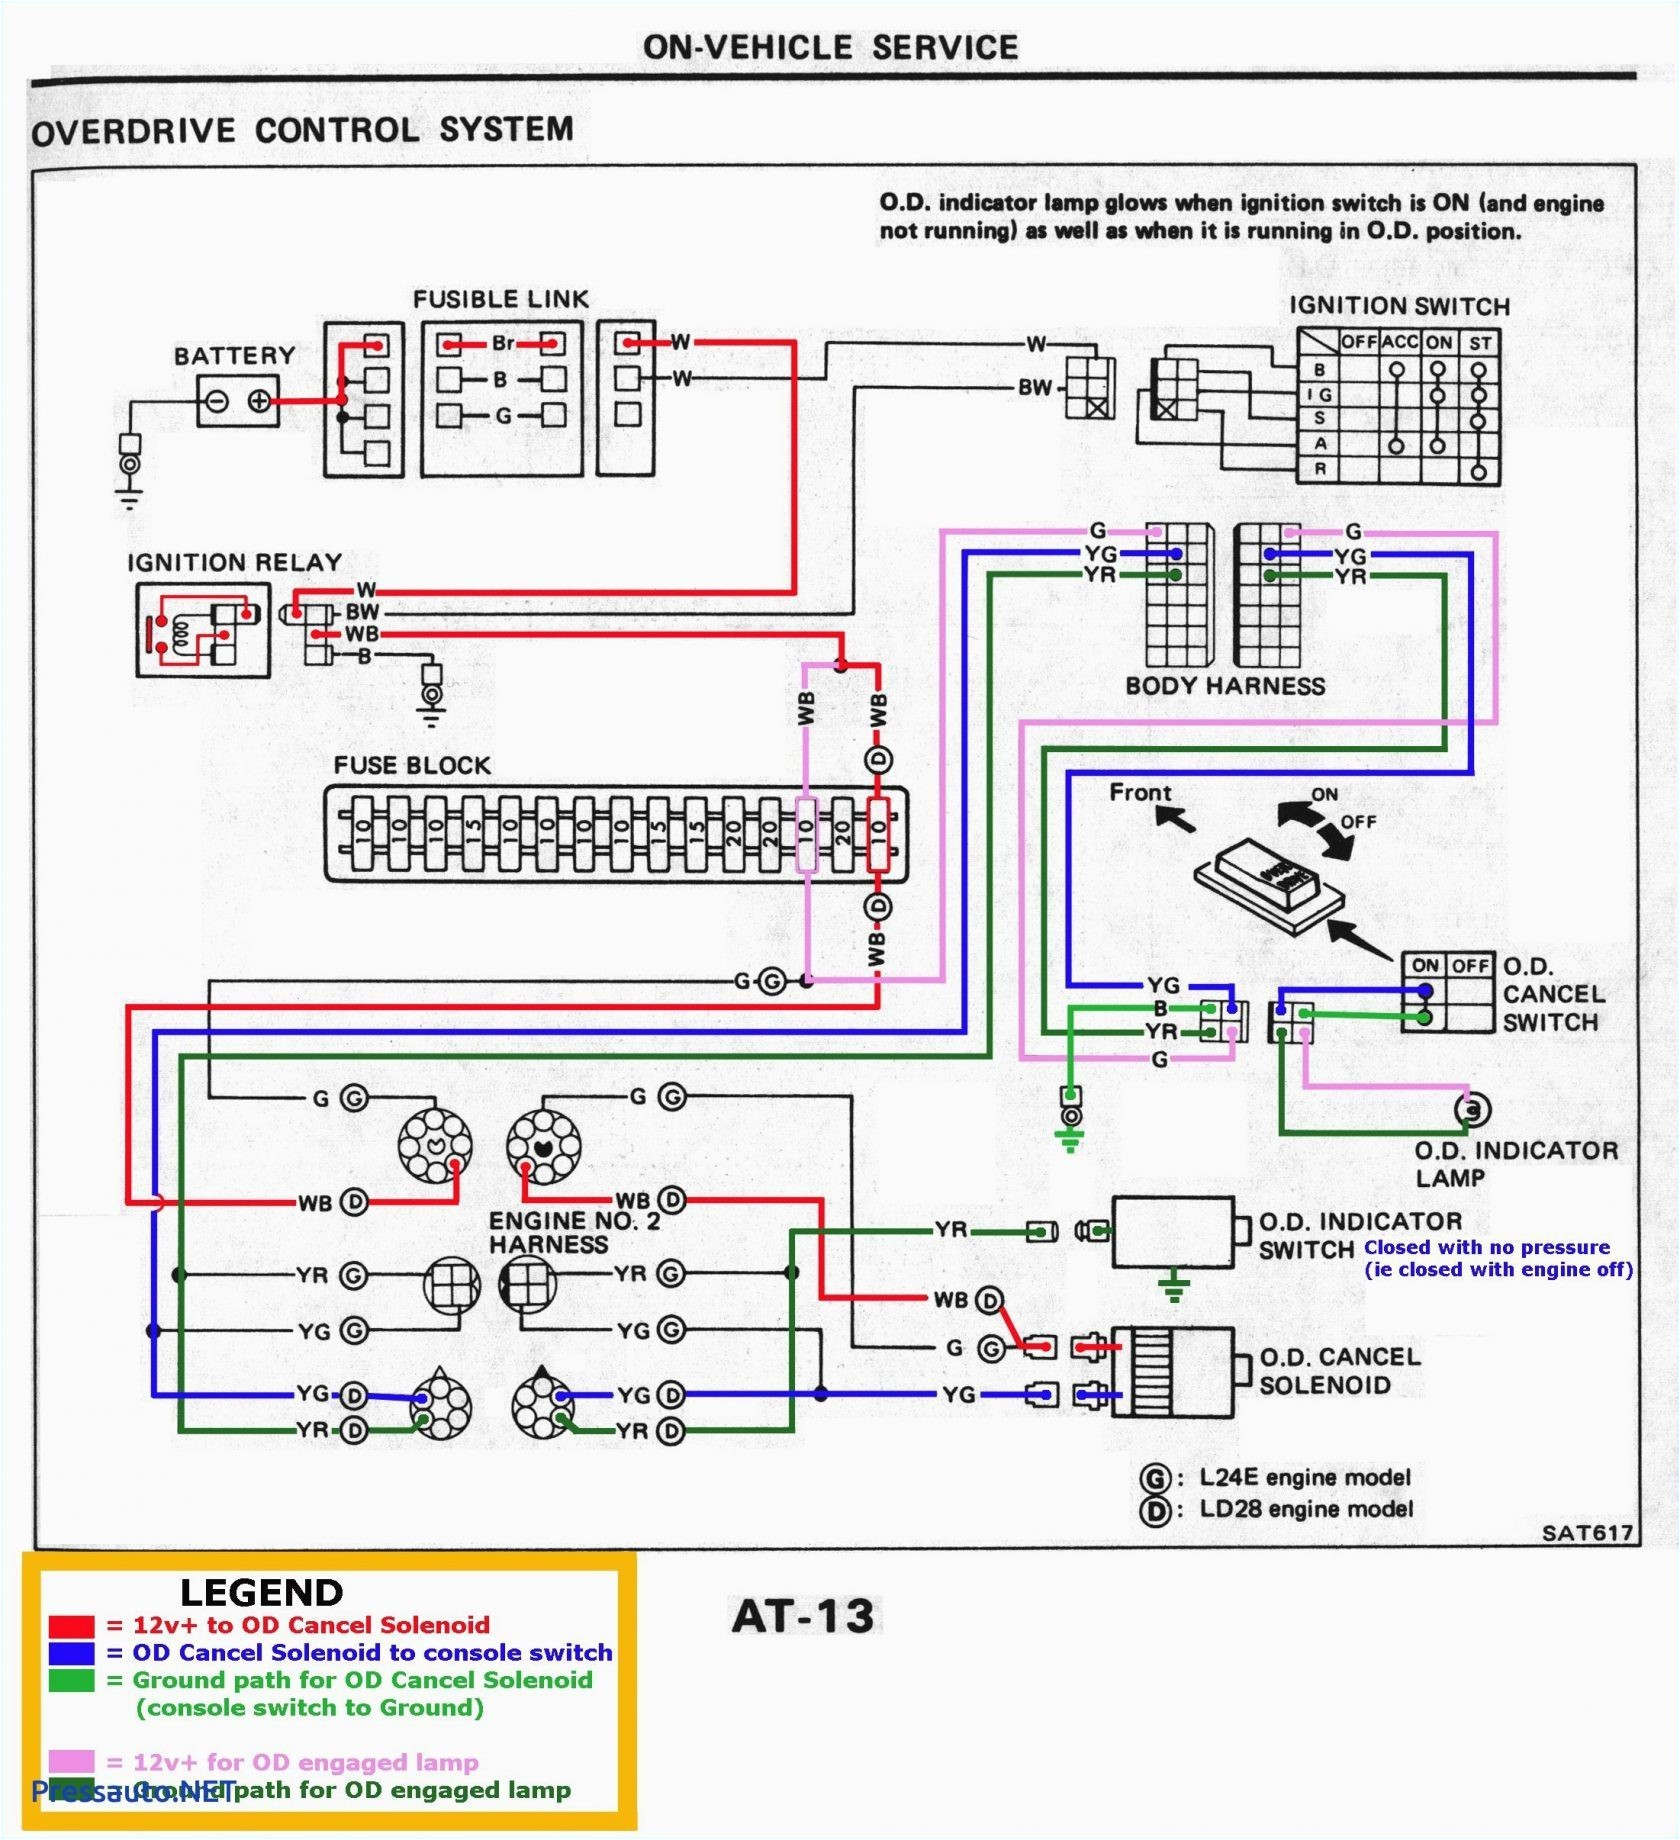 2003 Chevy Impala Spark Plug Wire Diagram Wiring Diagram for 2001 Dodge Ram 1500 Wiring Diagram Paper